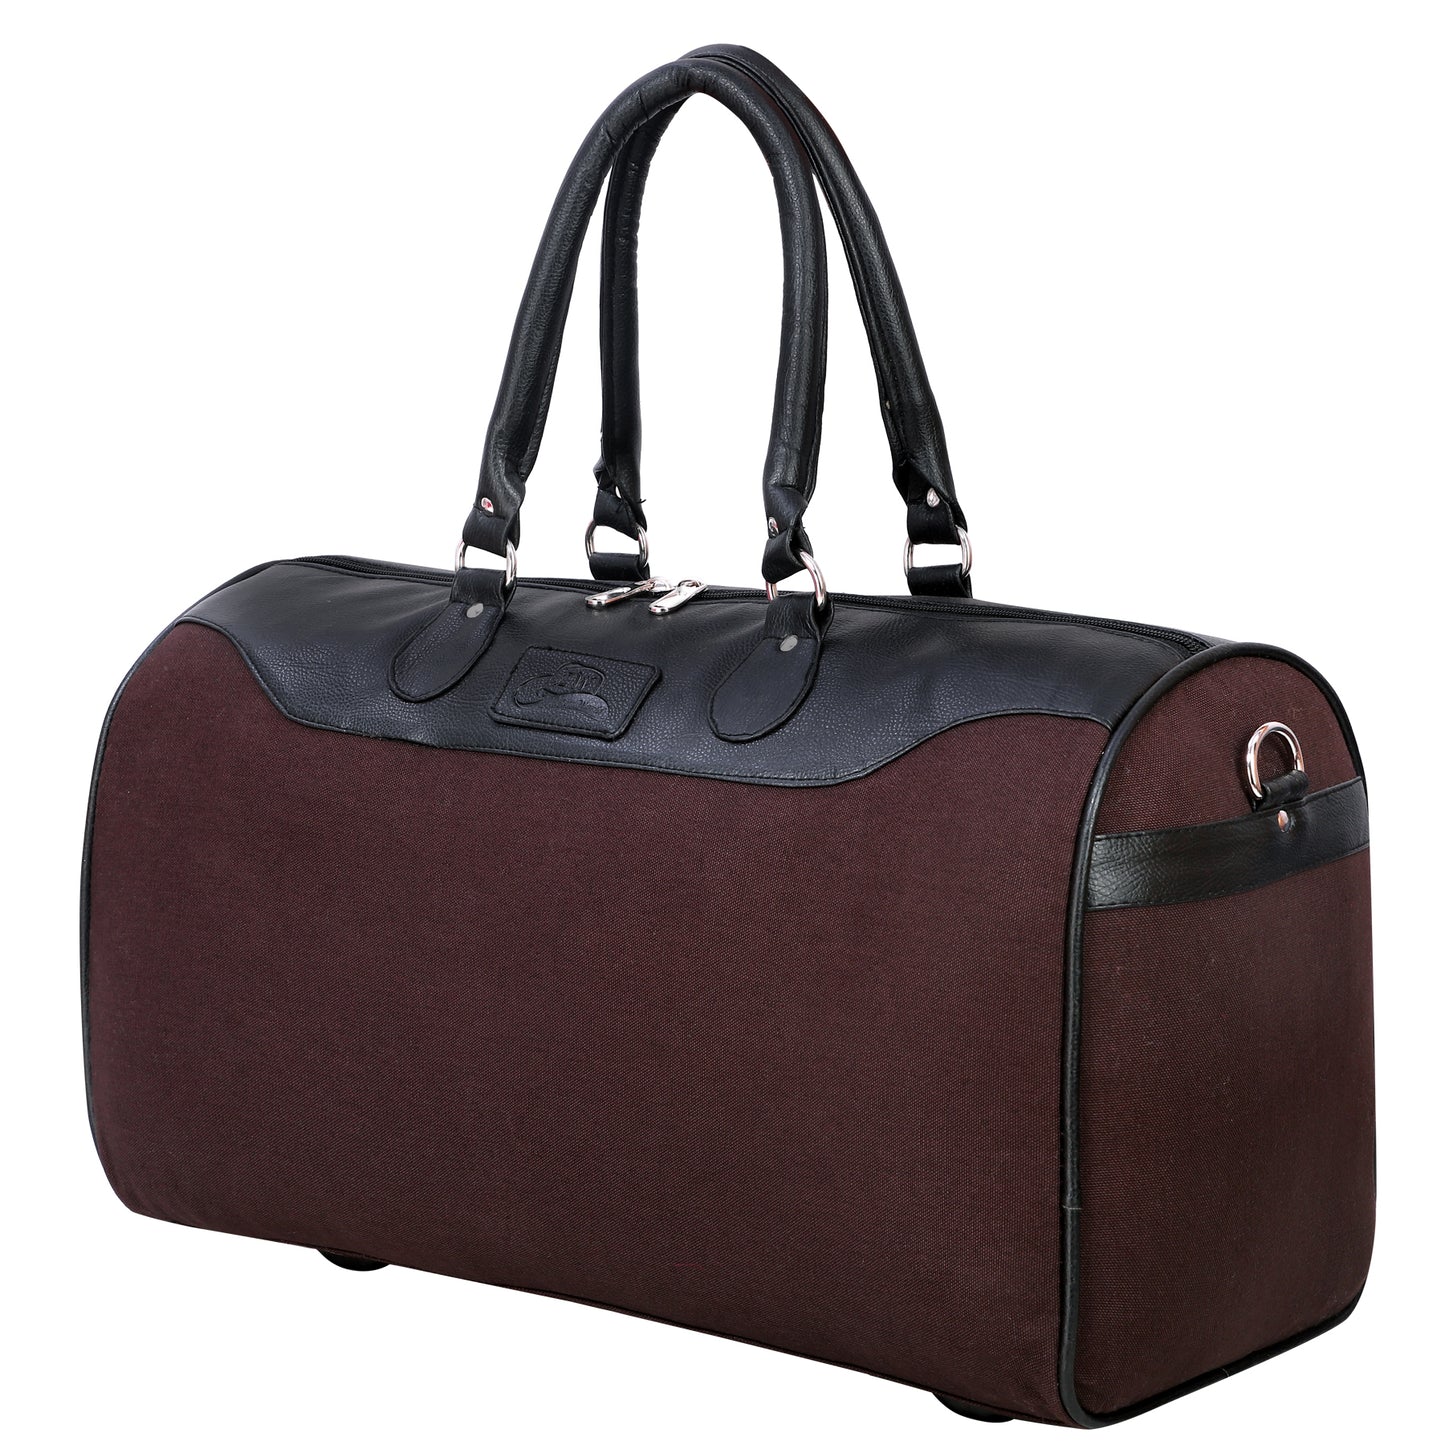 Leather World 30 Liter Canvas Duffle Bag for Travel Business Trip Overnight Luggage Bag Men and Women